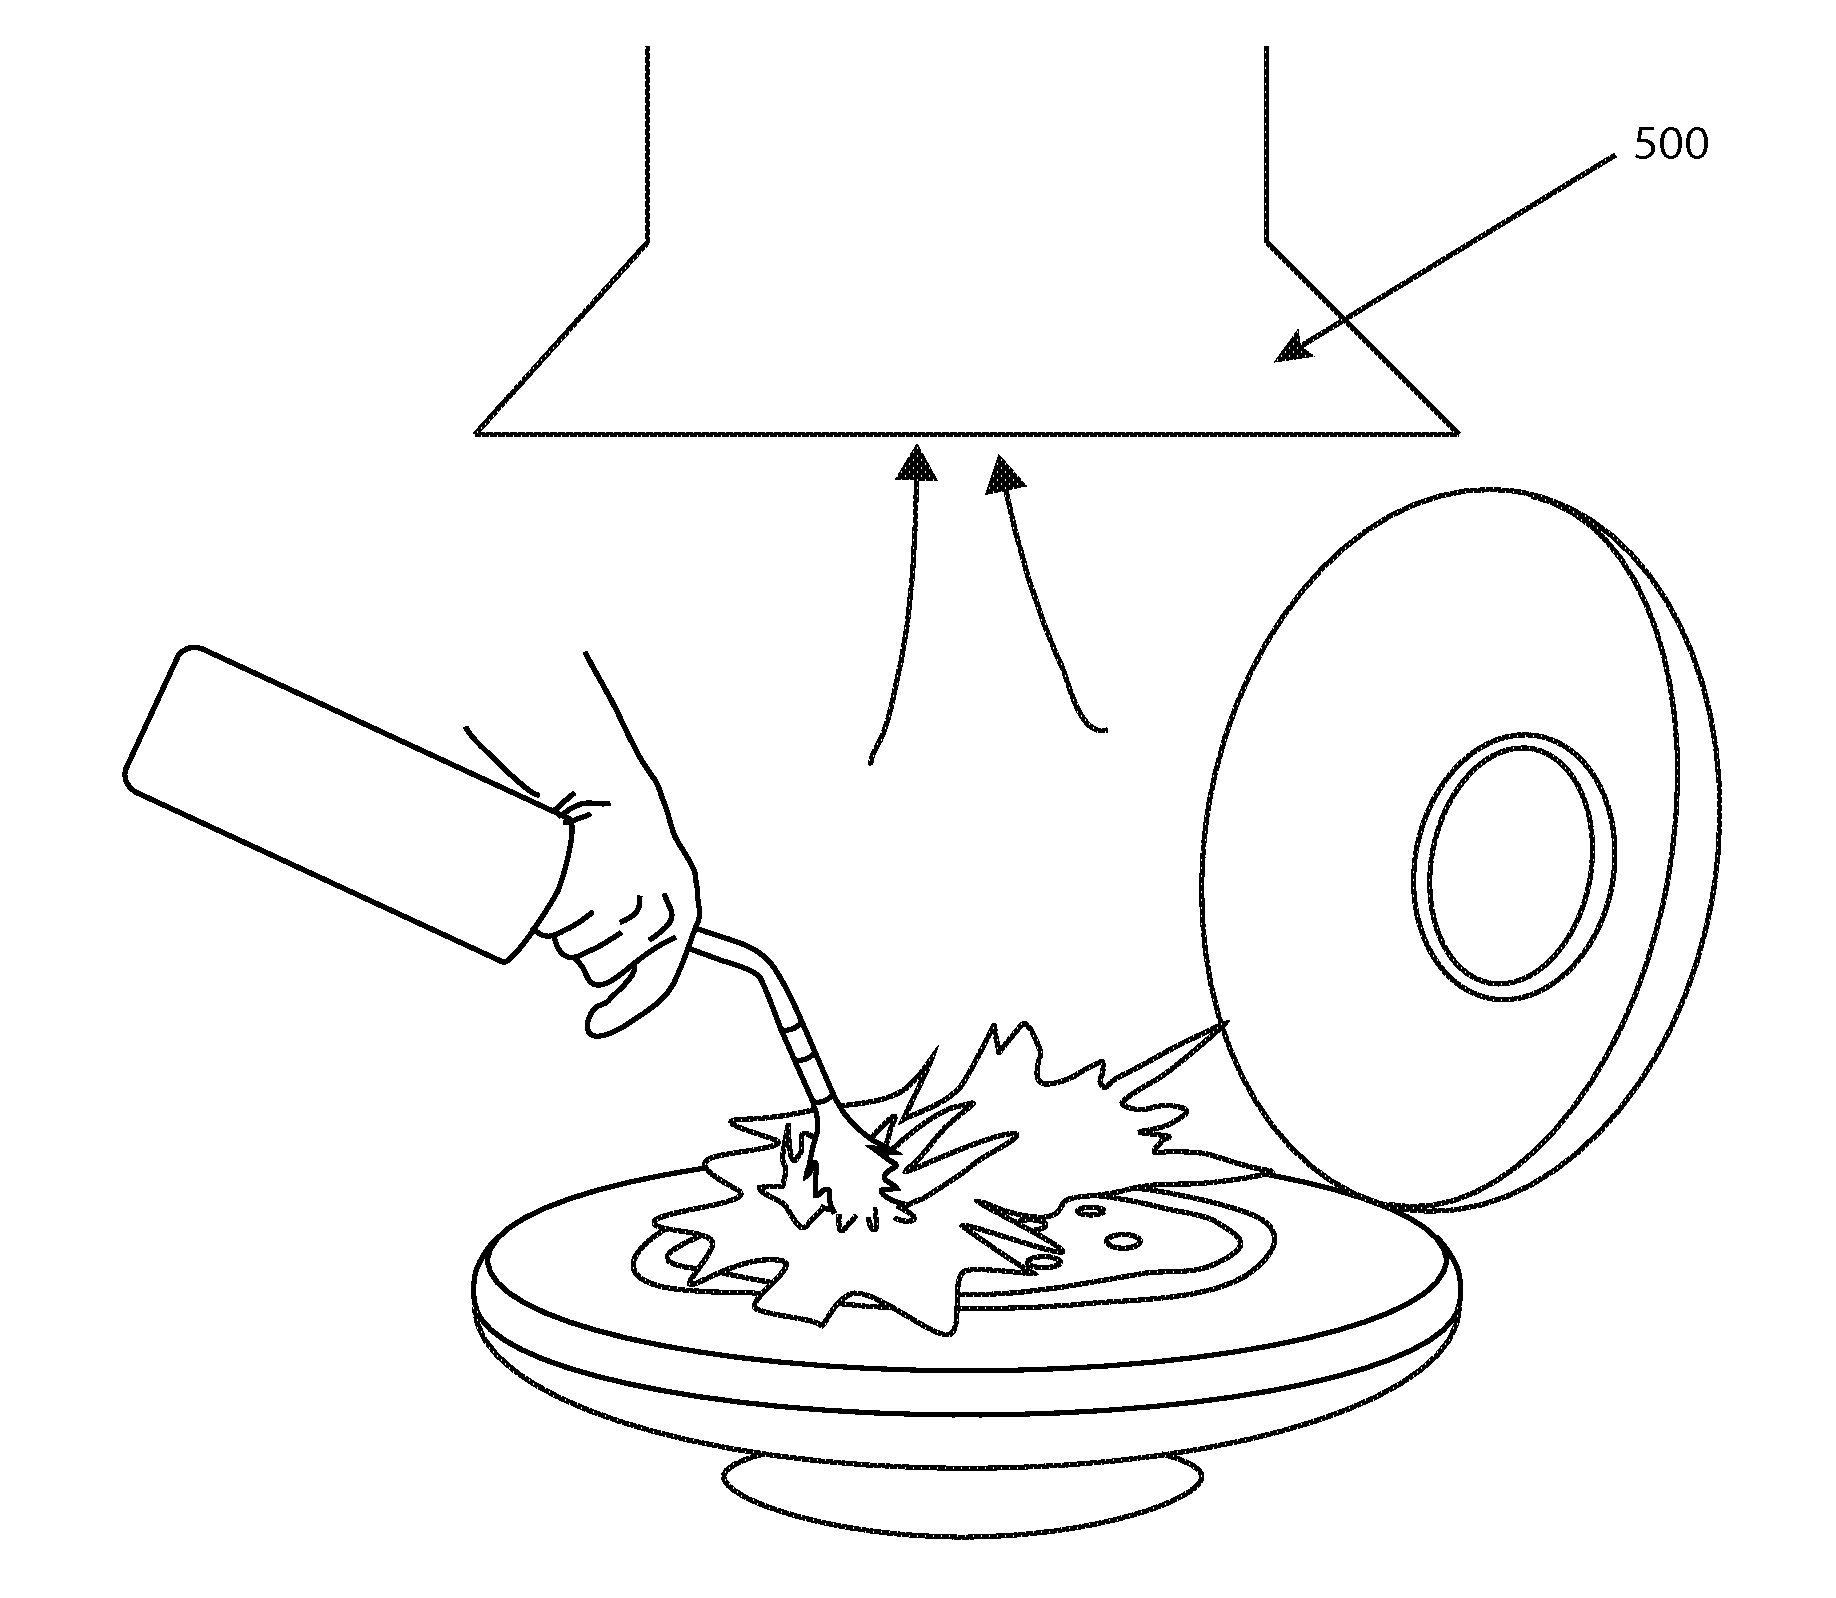 Method and Apparatus for Cooking Pizza